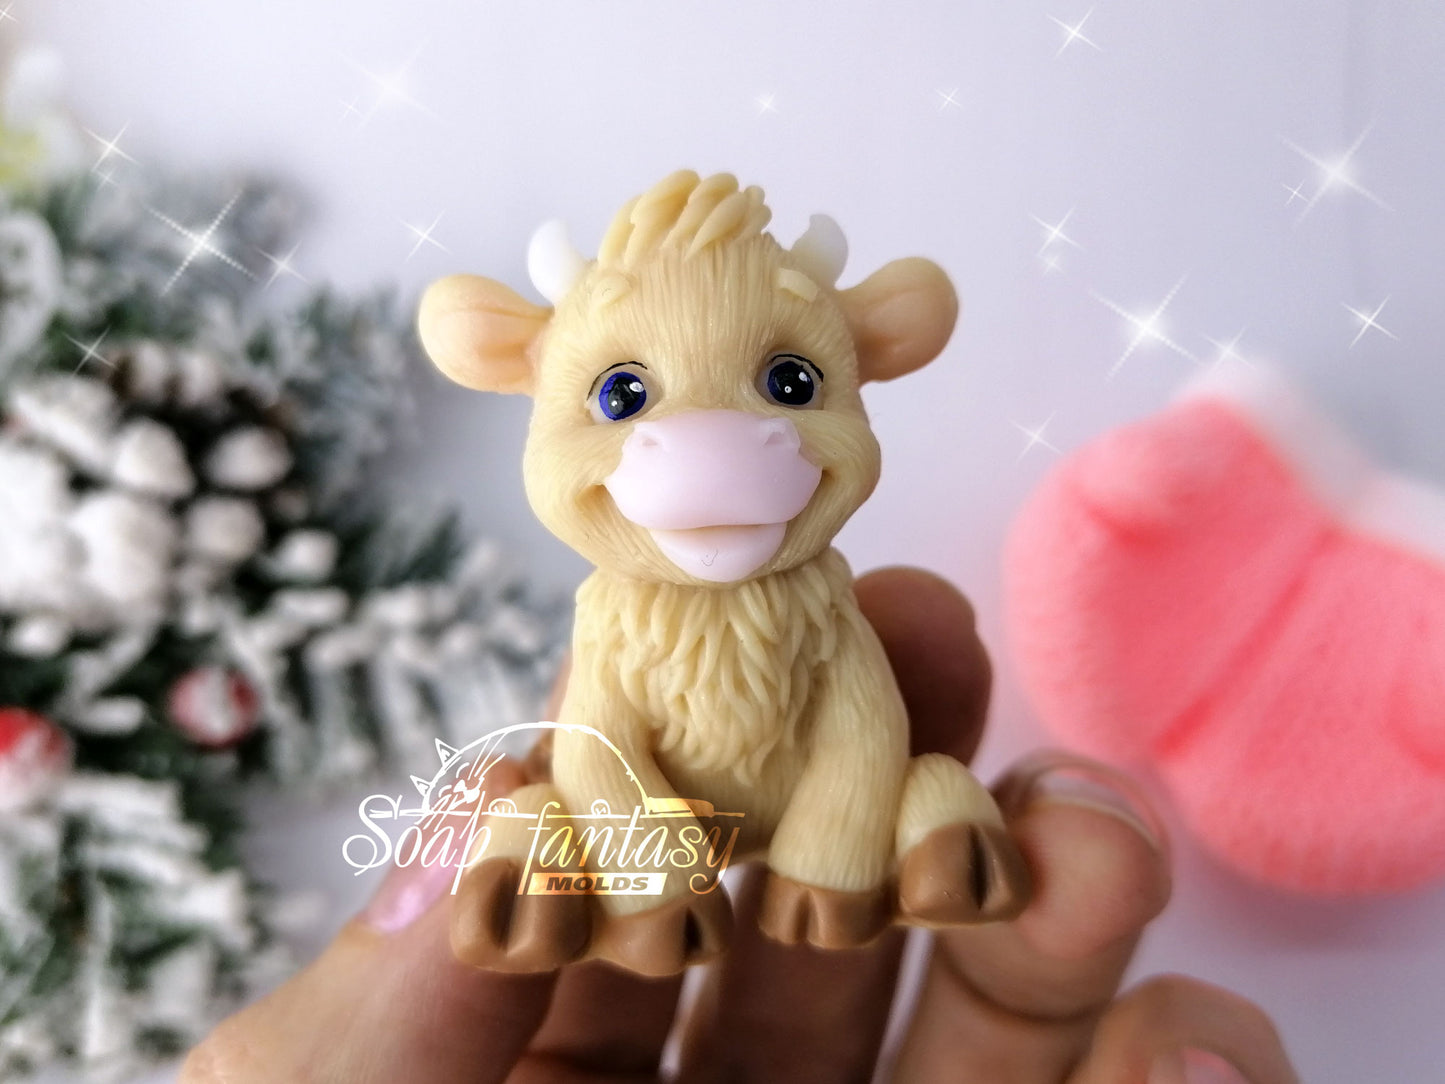 MooMoo sitting baby bulls silicone mold for soap making